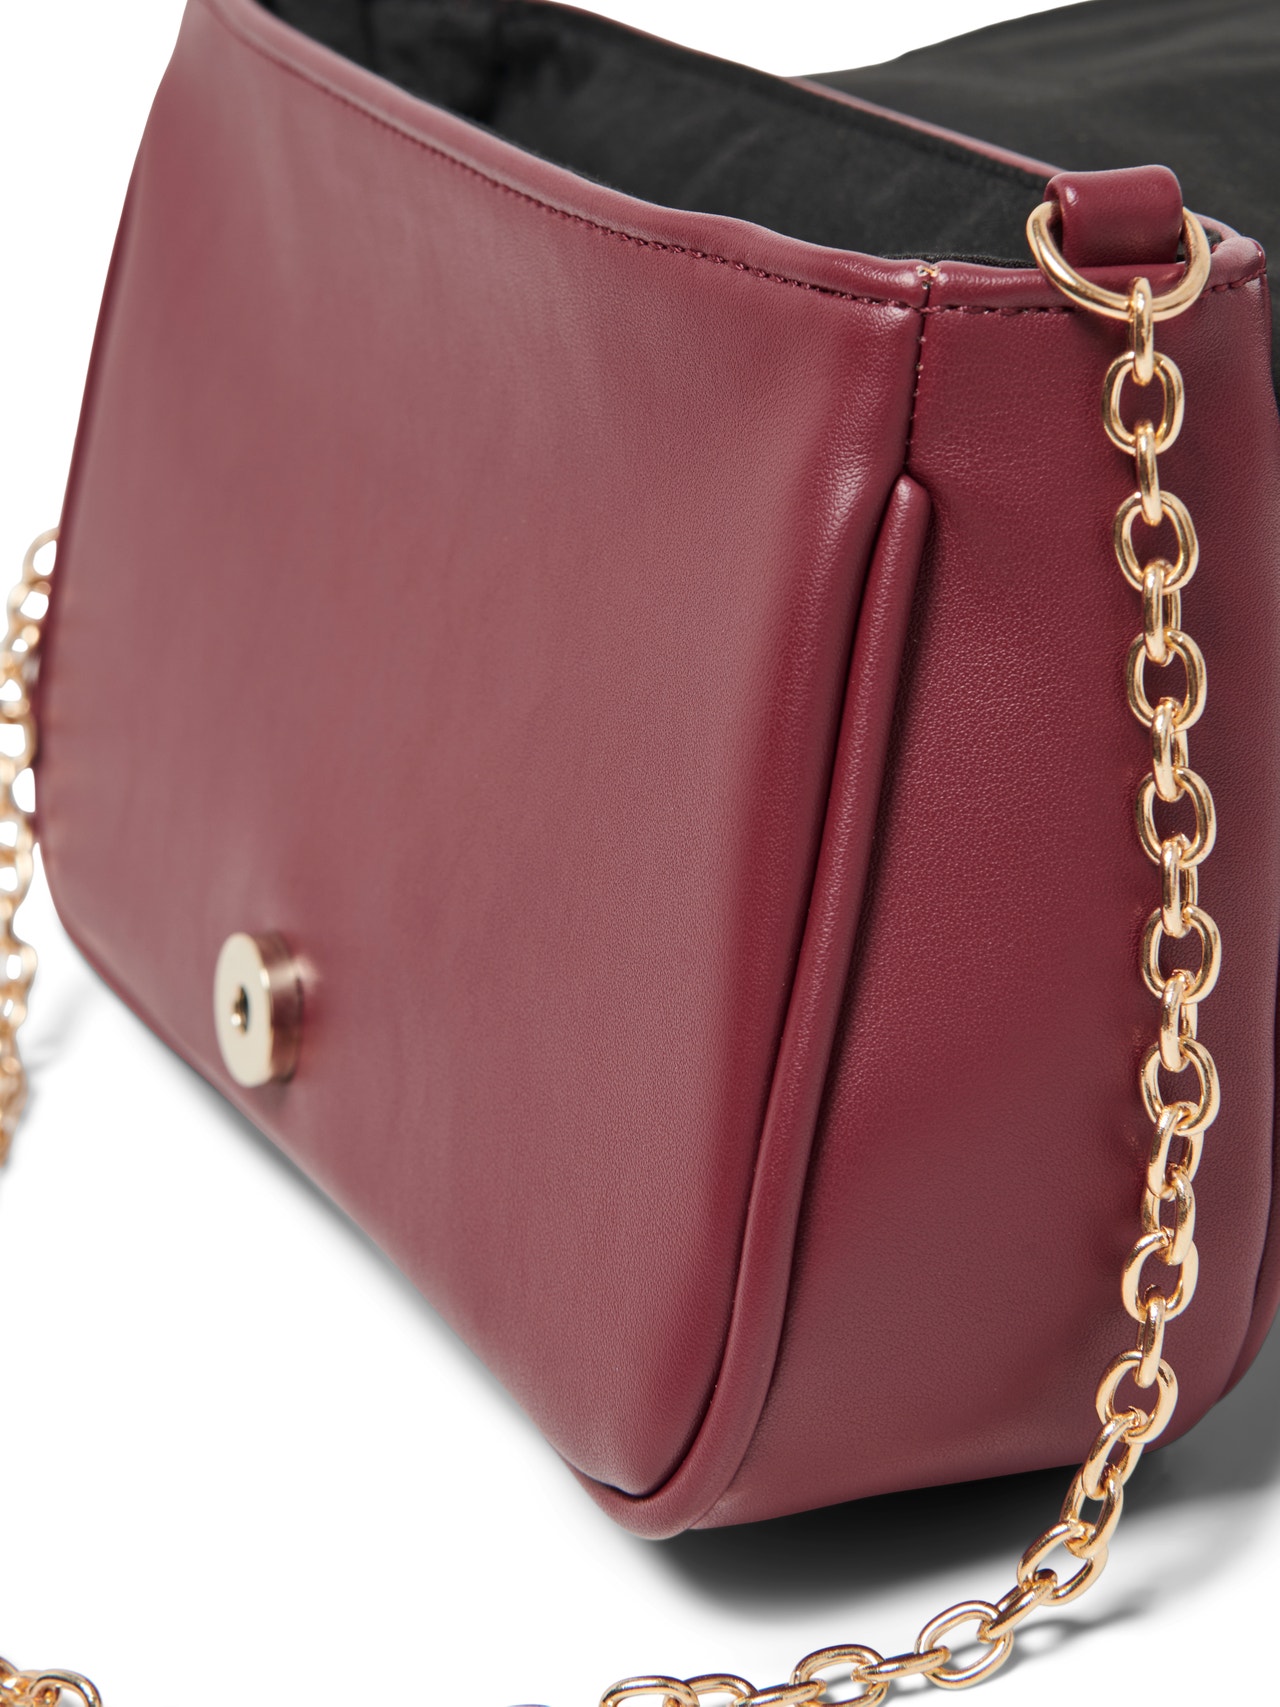 ONLY Bag with chain strap -Chocolate Truffle - 15300843